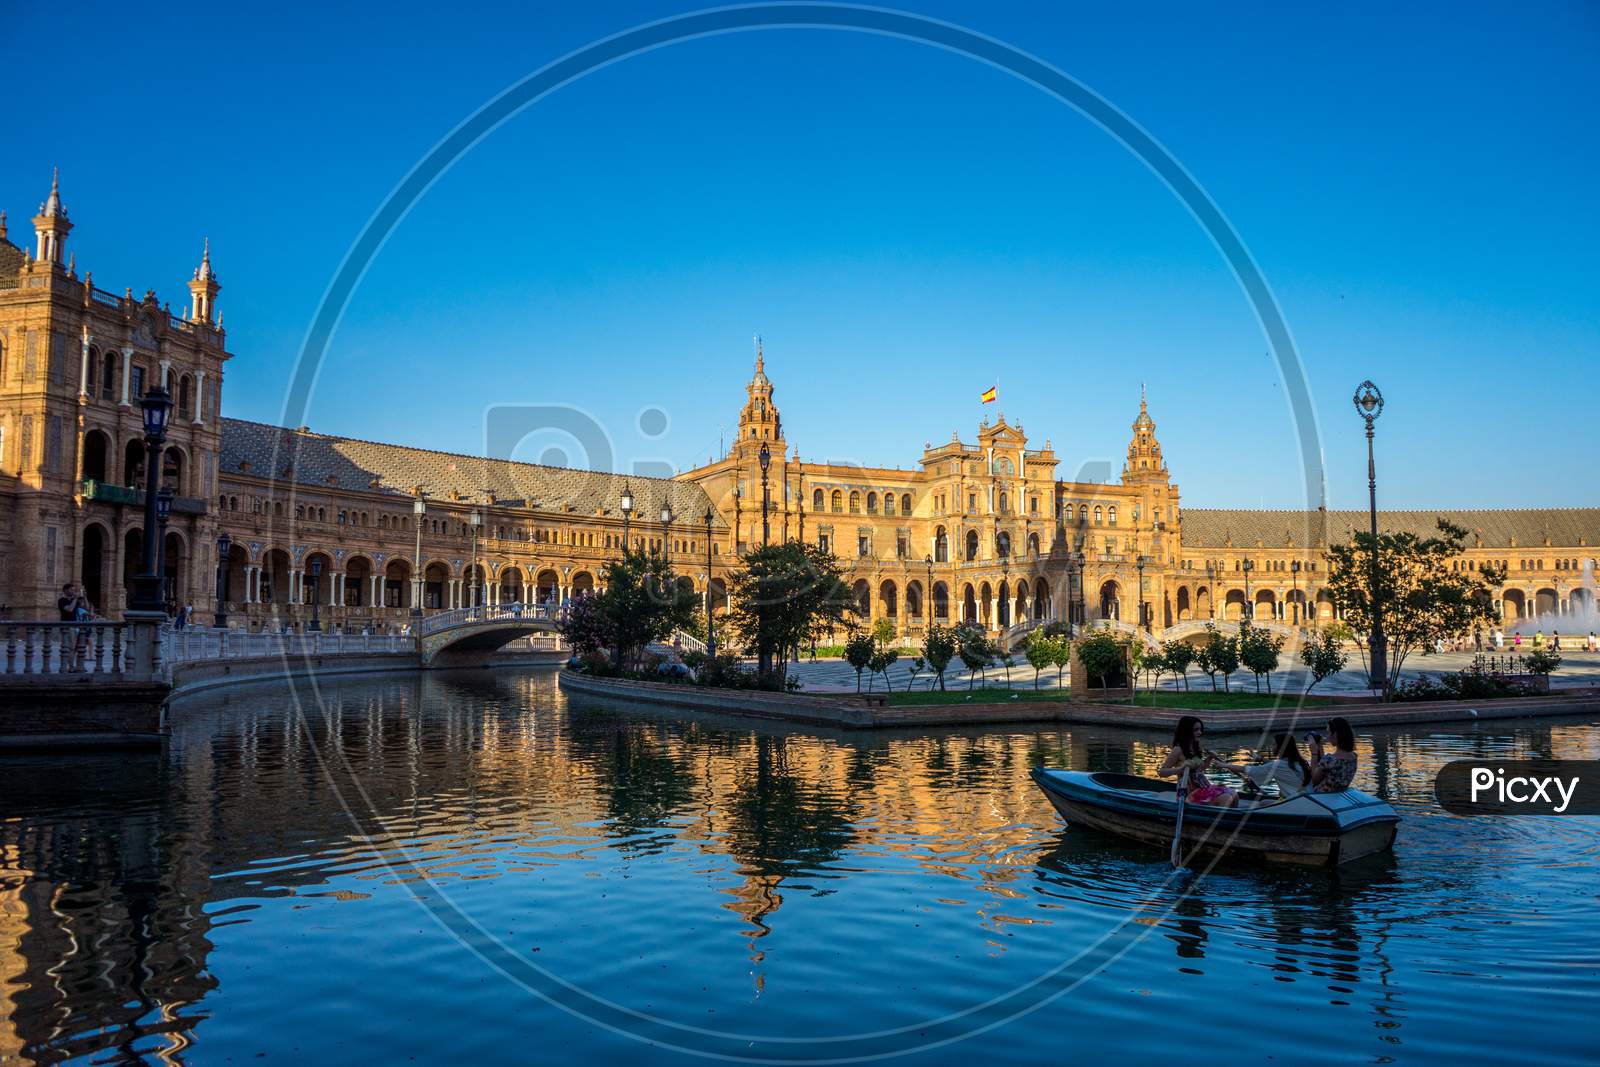 Water Boat At Plaza De Espana In Seville, Spain, Europe